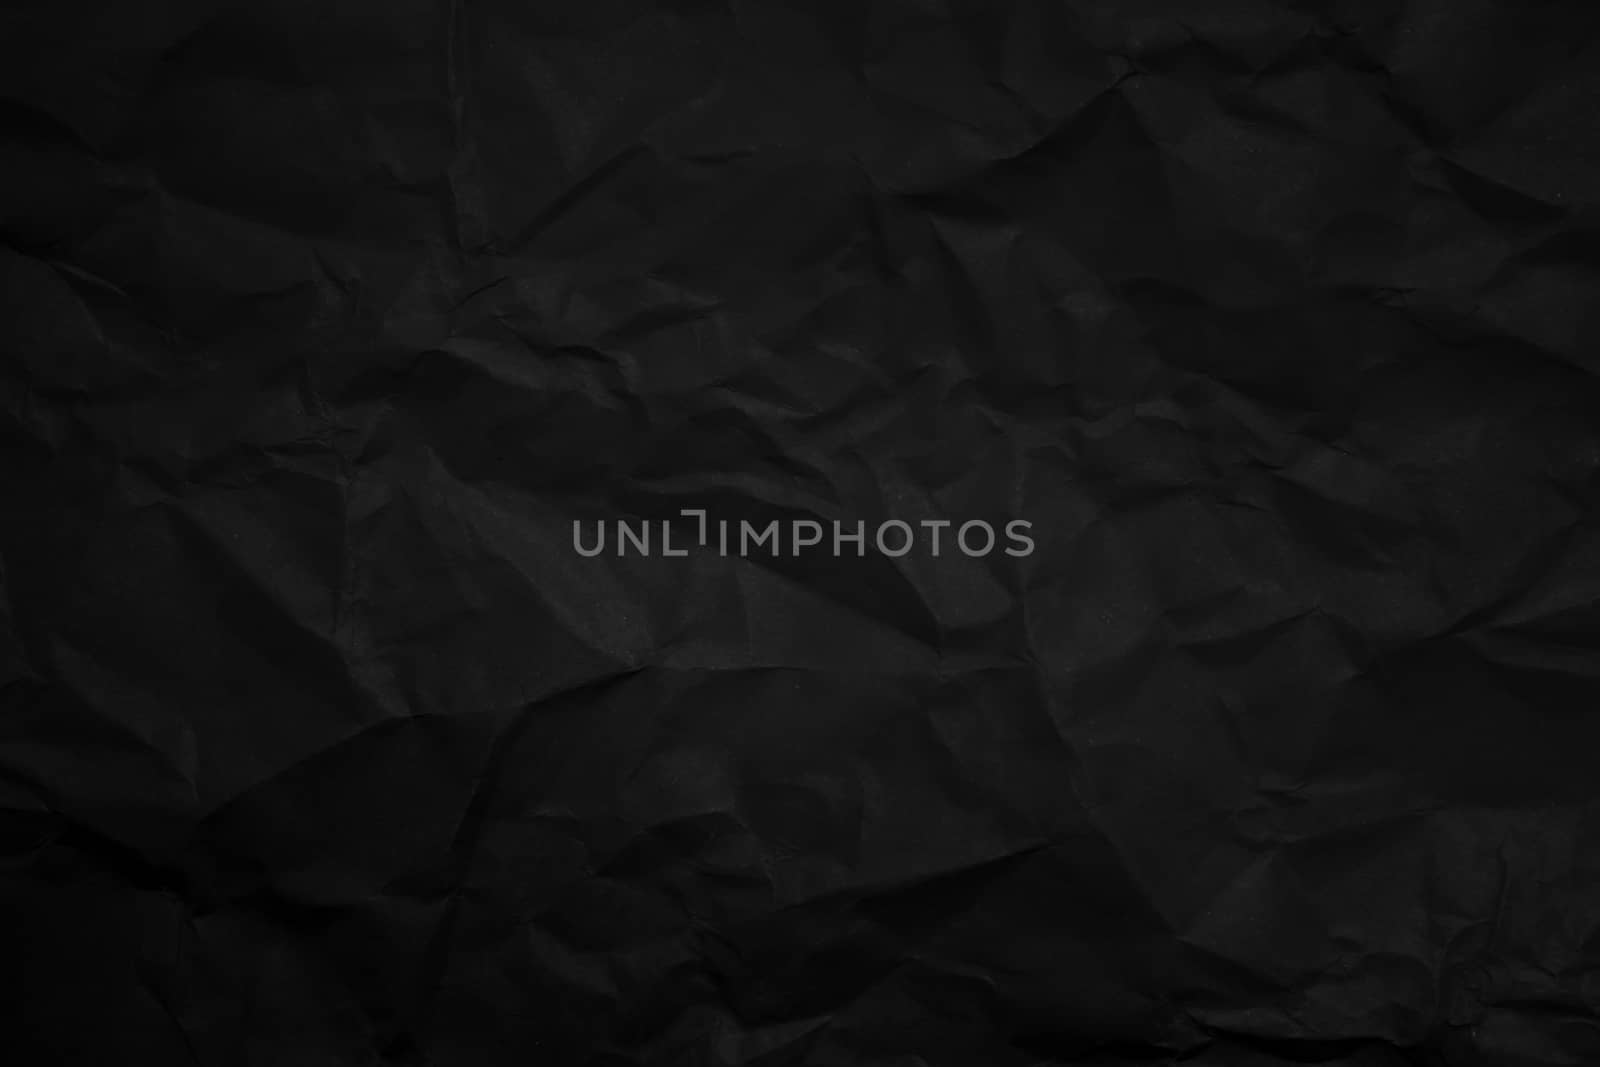 Black clumped Paper texture background, kraft paper horizontal with Unique design of paper, Natural paper style For aesthetic creative design